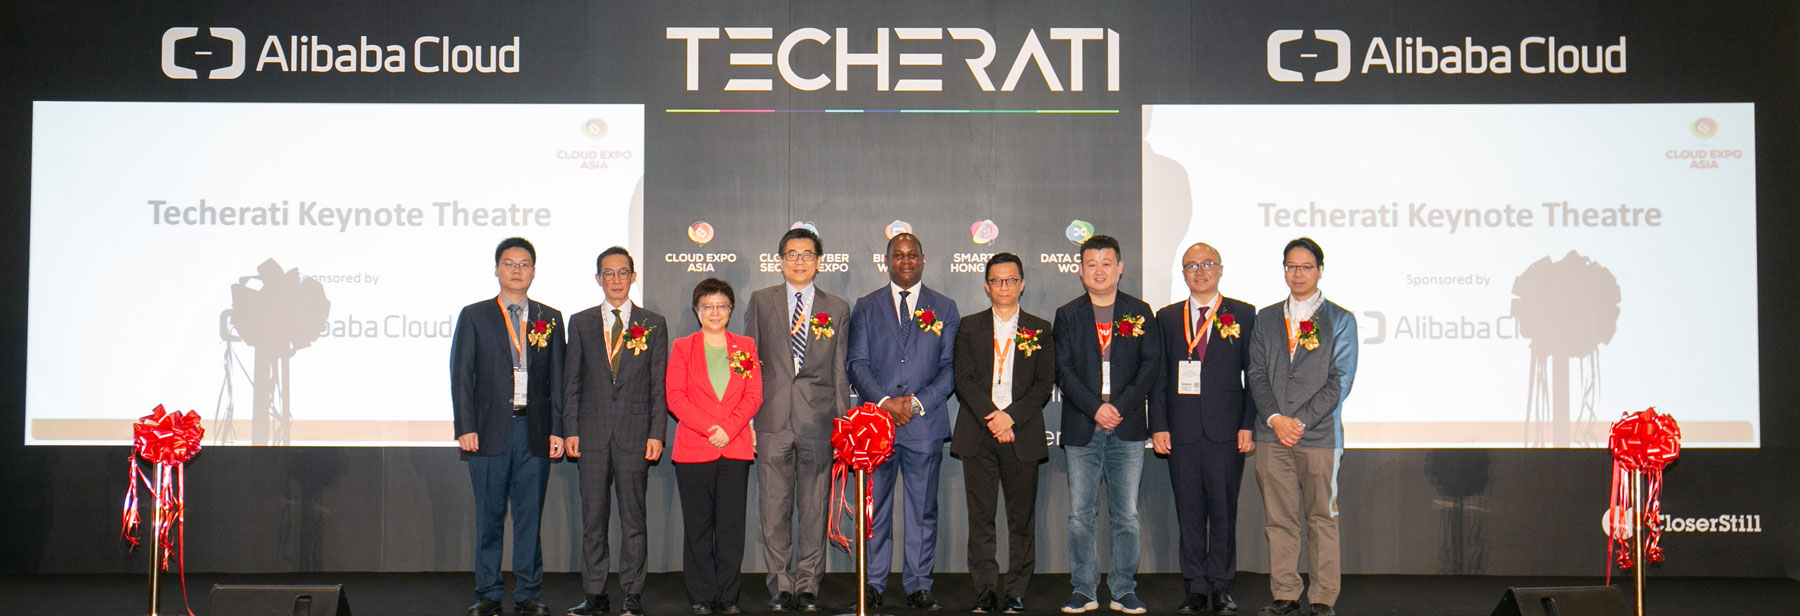 the Government Chief Information Officer, Ir Allen Yeung (centre), Mr Andy Kiwanuka, Managing Director, Asia Pacific, CloserStill Media Ltd. (fifth right),  Mr Ricky Wong, Chairman, Hong Kong Television Network (fourth right), Mr Xu Guangbin, Chairman and Chief Executive Officer, Huayun Data Group Co. Ltd. (third right), Mr Leo Liu, General Manager for Alibaba Cloud HK, Macau and Korea, Alibaba Cloud (second right), Hon Charles Mok, JP, Legislative Councilor (first right), Dr Winnie Tang, Co-Founder and Honorary President, Smart City Consortium (third left), Mr Stephen Wong, Privacy Commissioner for Personal Data (second left), 黄超, 總經理, IDC圈 (first left) in the Opening Ceremony of 3rd Edition of Cloud Expo Asia 2018.